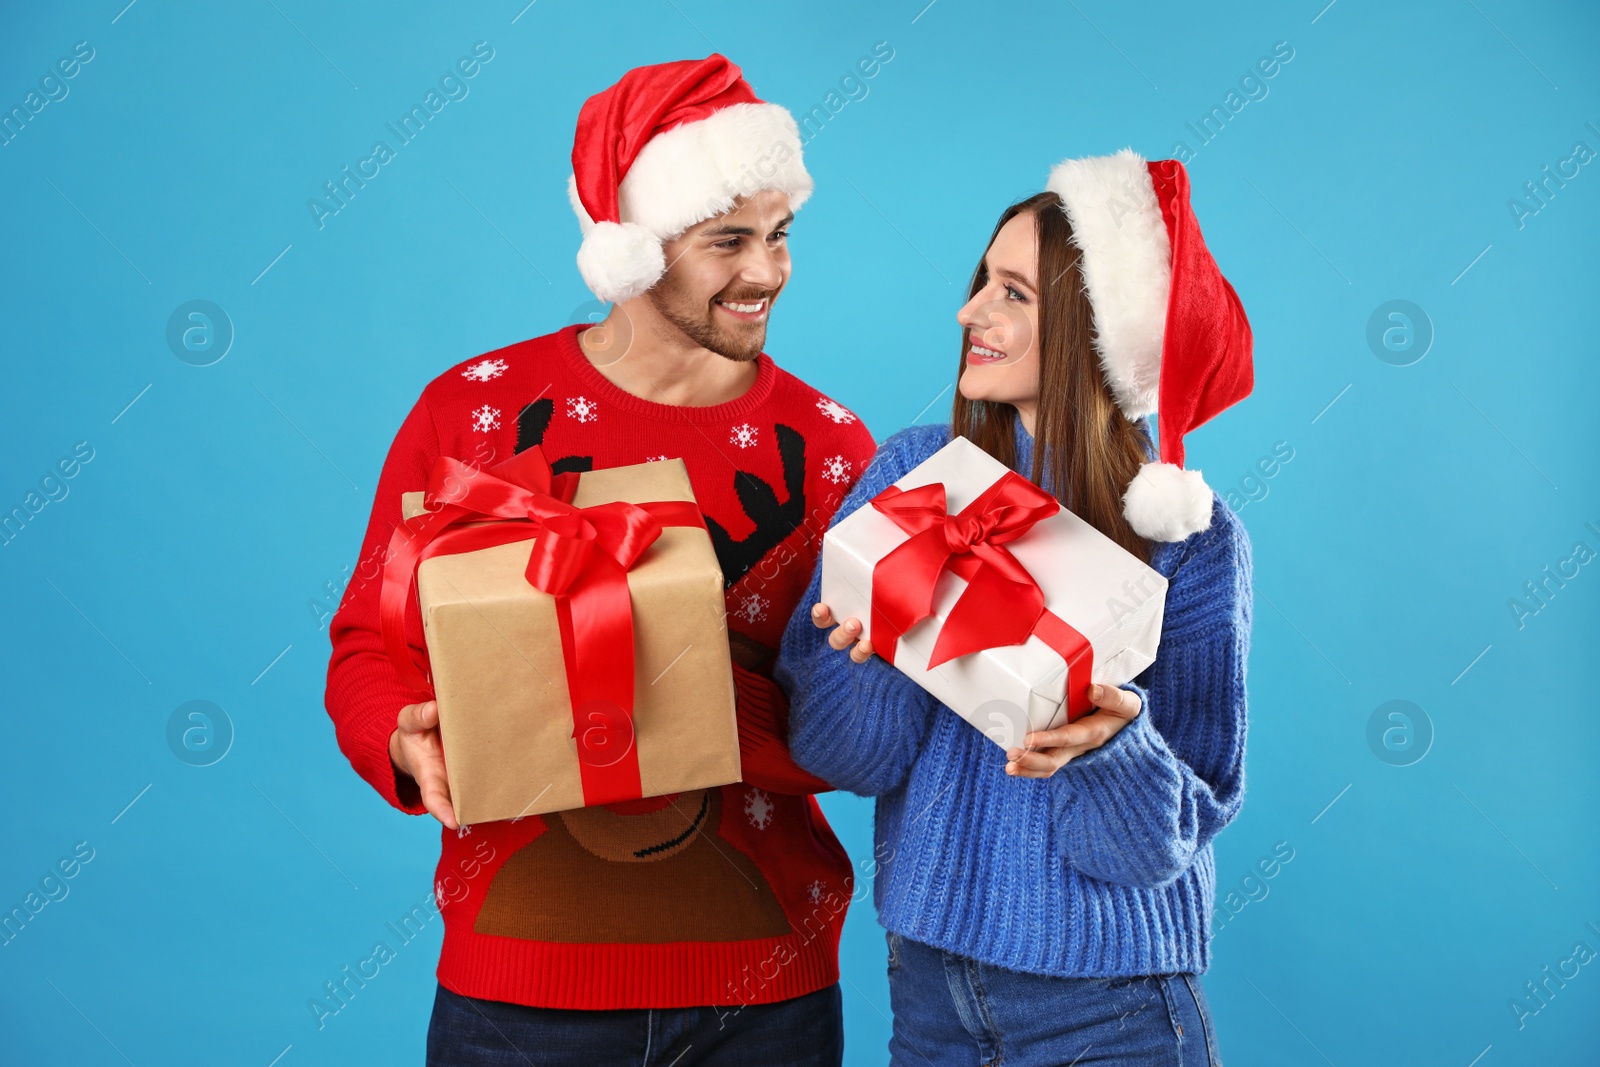 Photo of Couple in Christmas sweaters with Santa hats and gift boxes on blue background